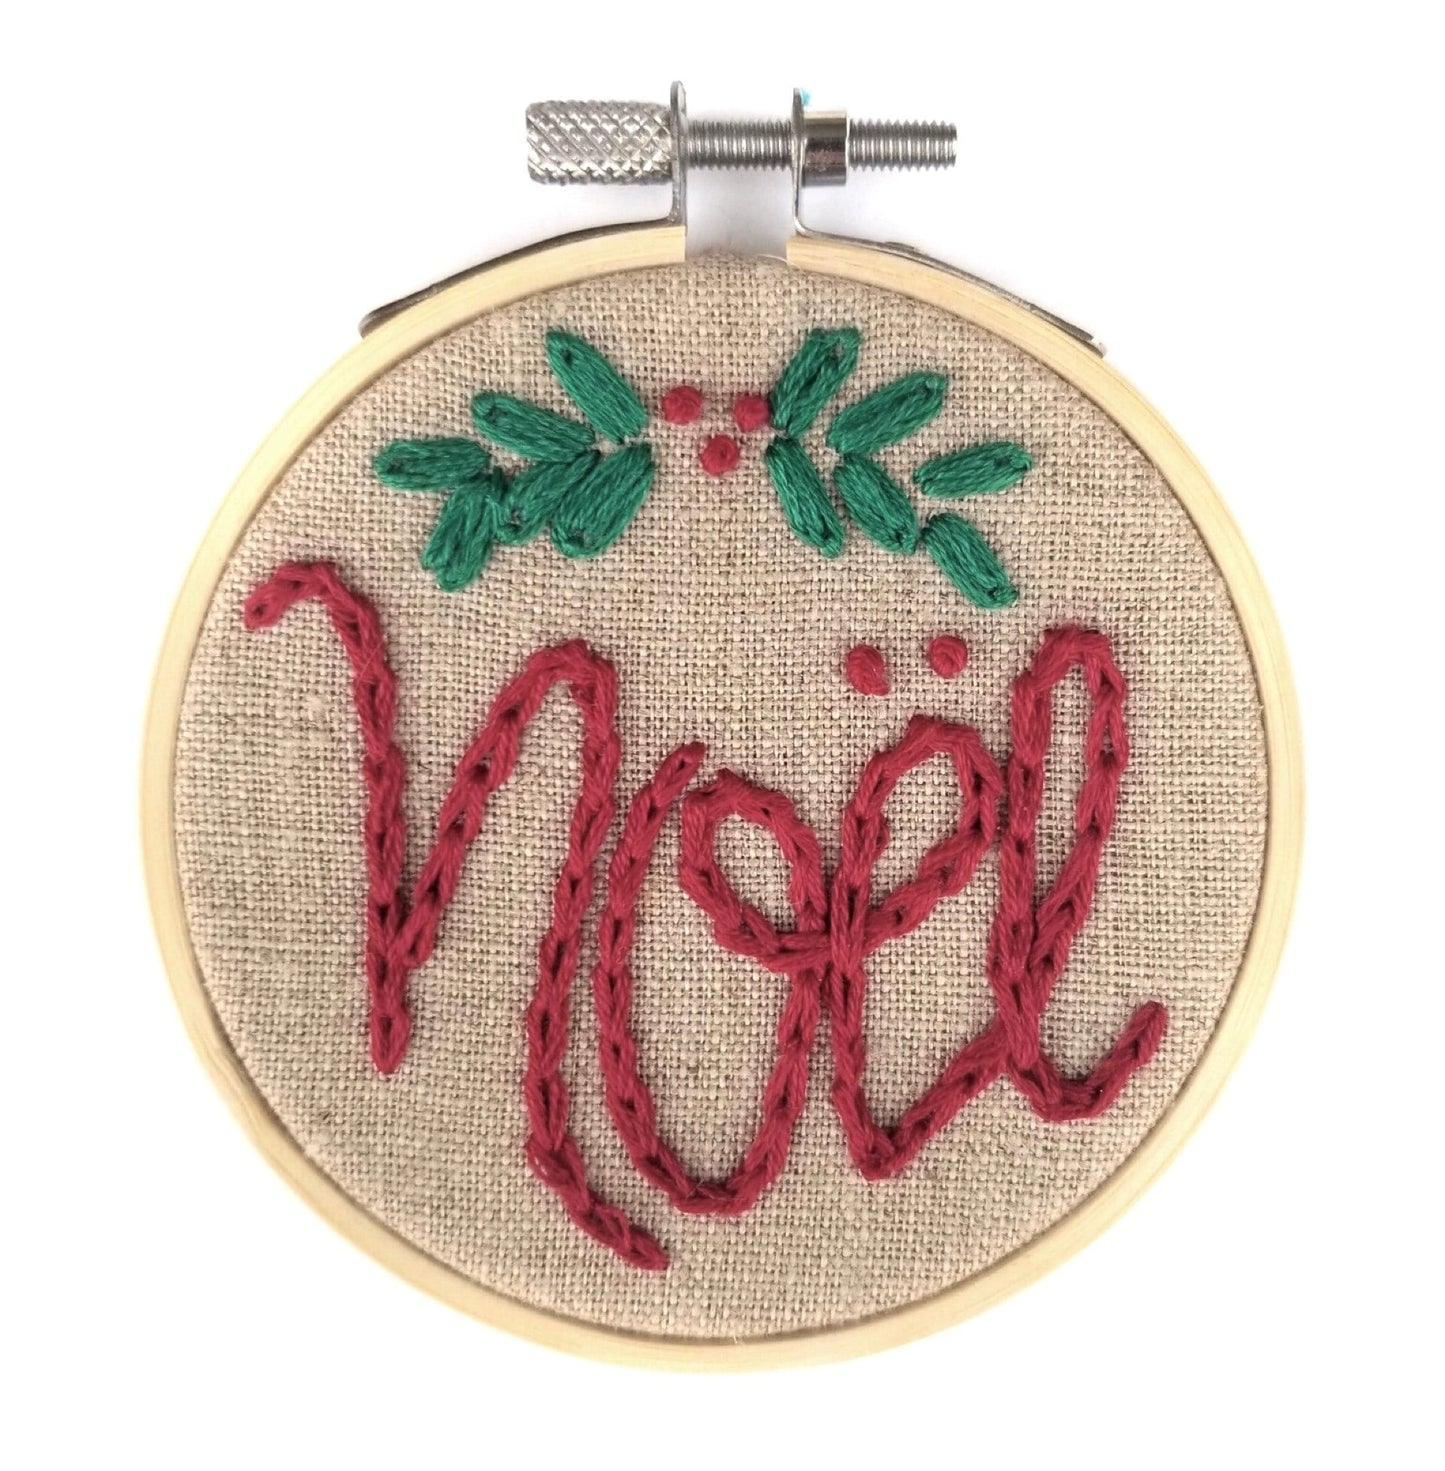 Noel Christmas Ornament PDF Embroidery Pattern